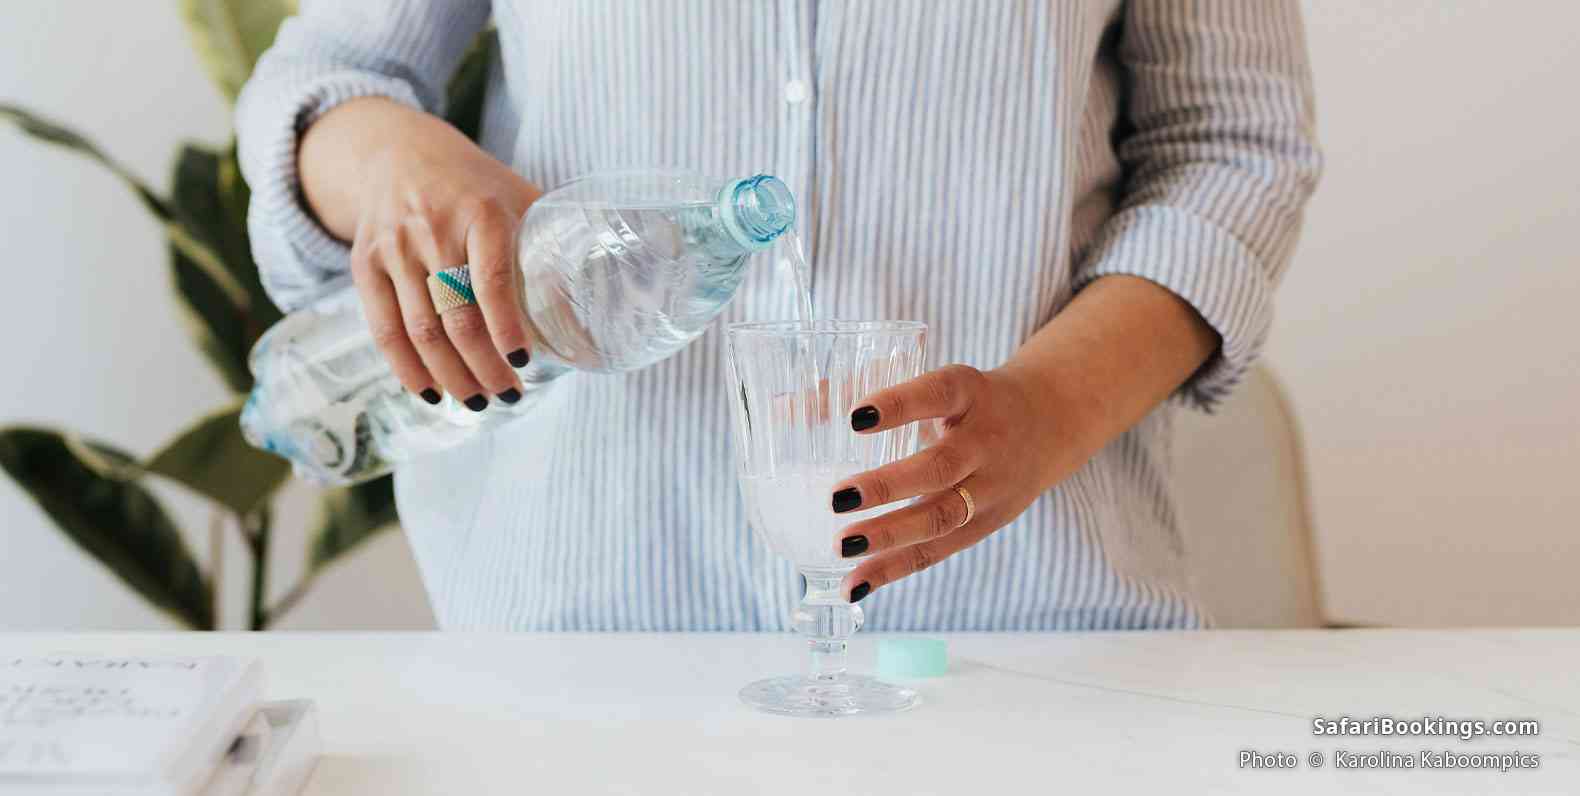 Woman pouring water into a glass